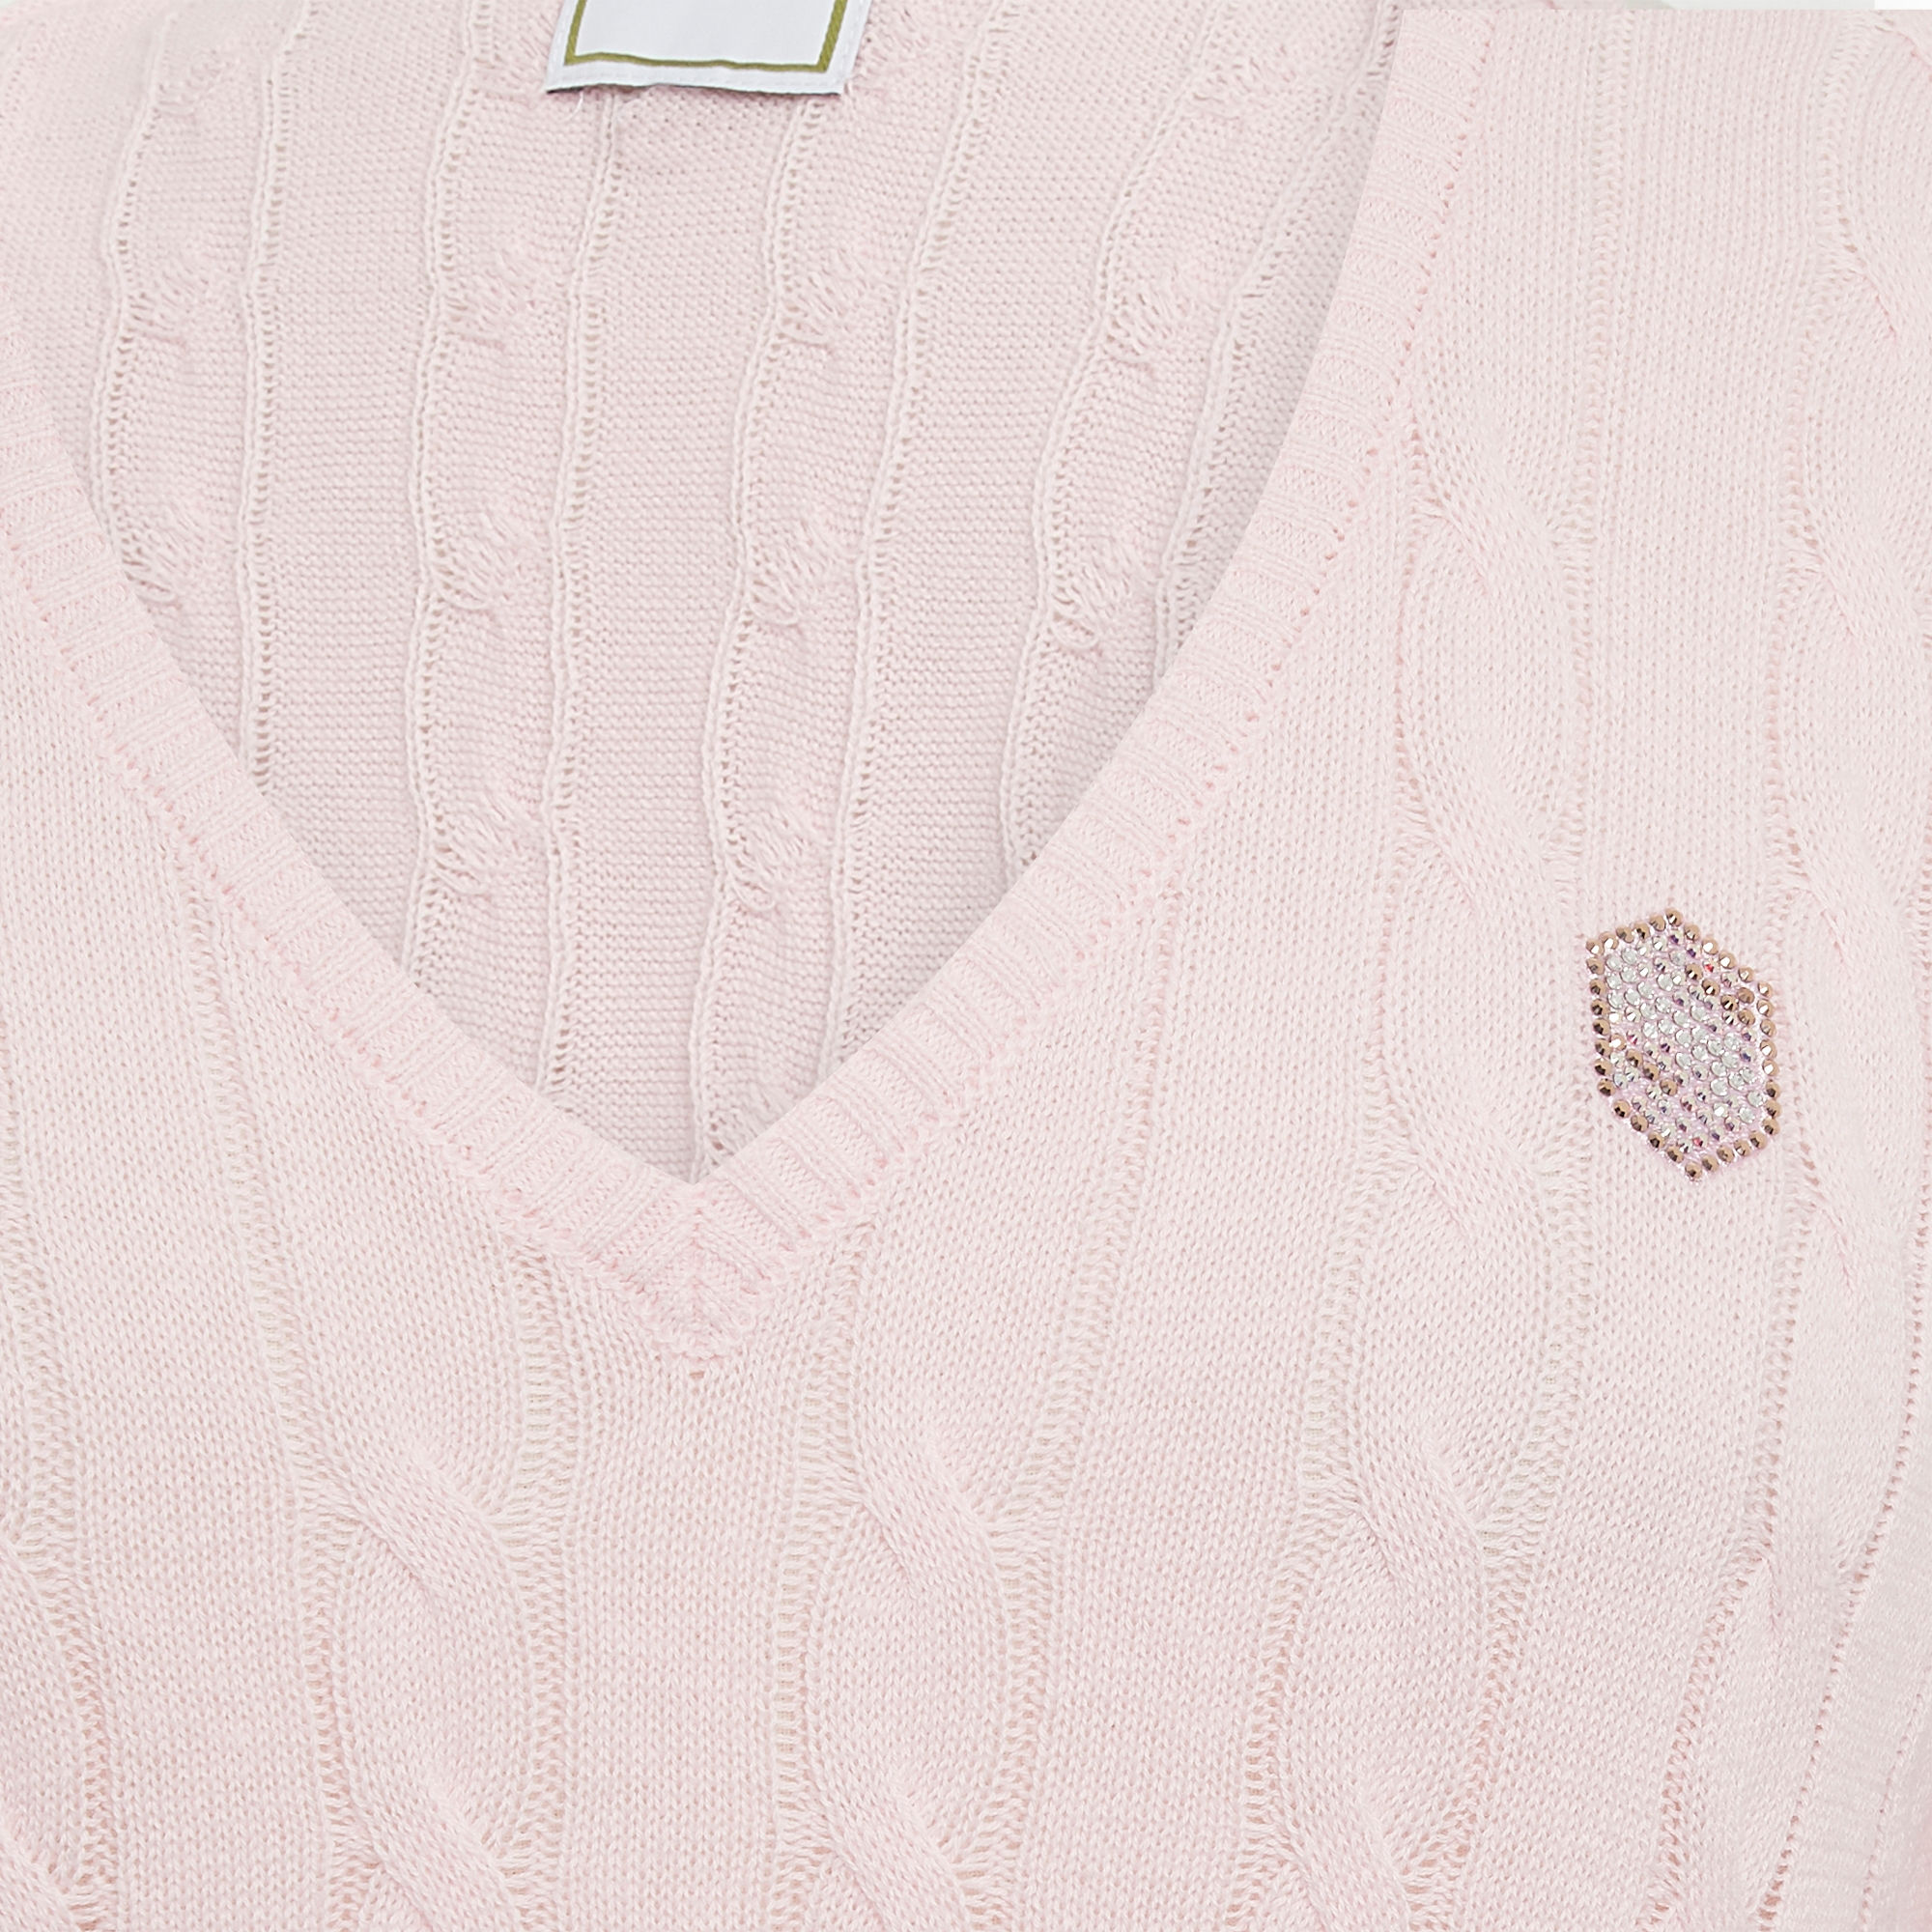 SQUARE_SOLINE_POWDERPINK_DETAIL